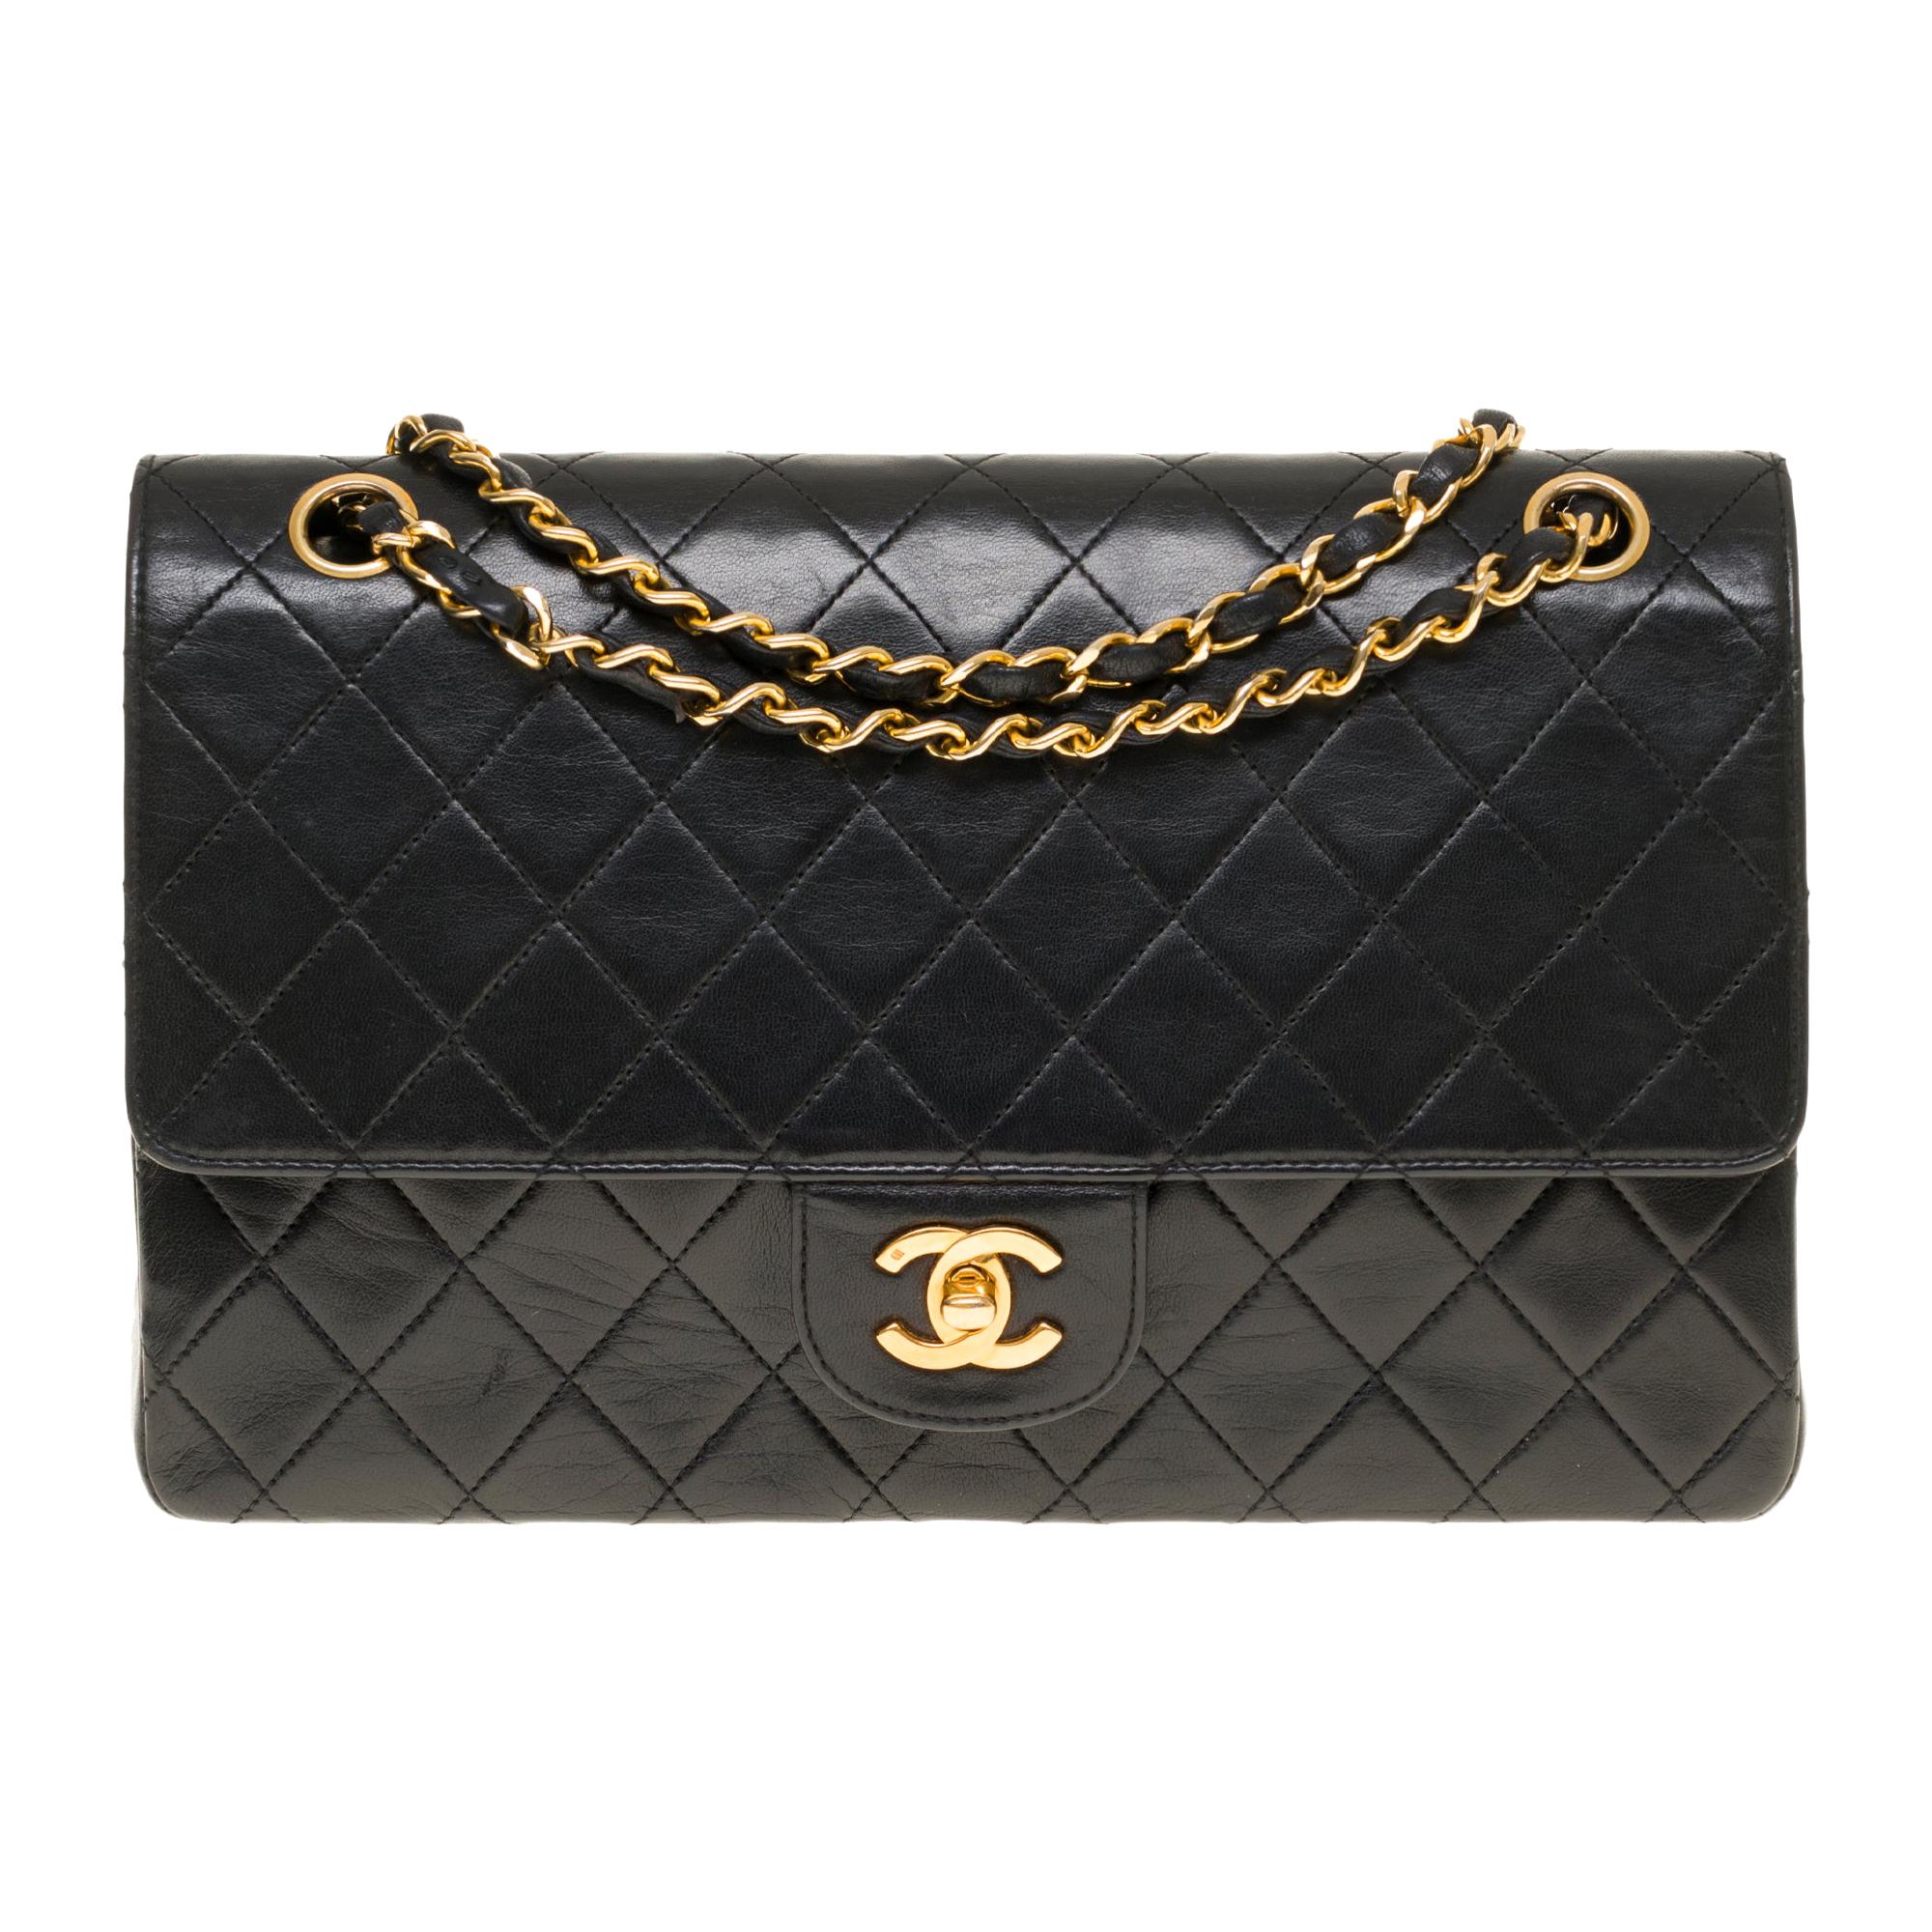 Chanel Classic 27cm shoulder bag in black quilted lambskin and gold hardware